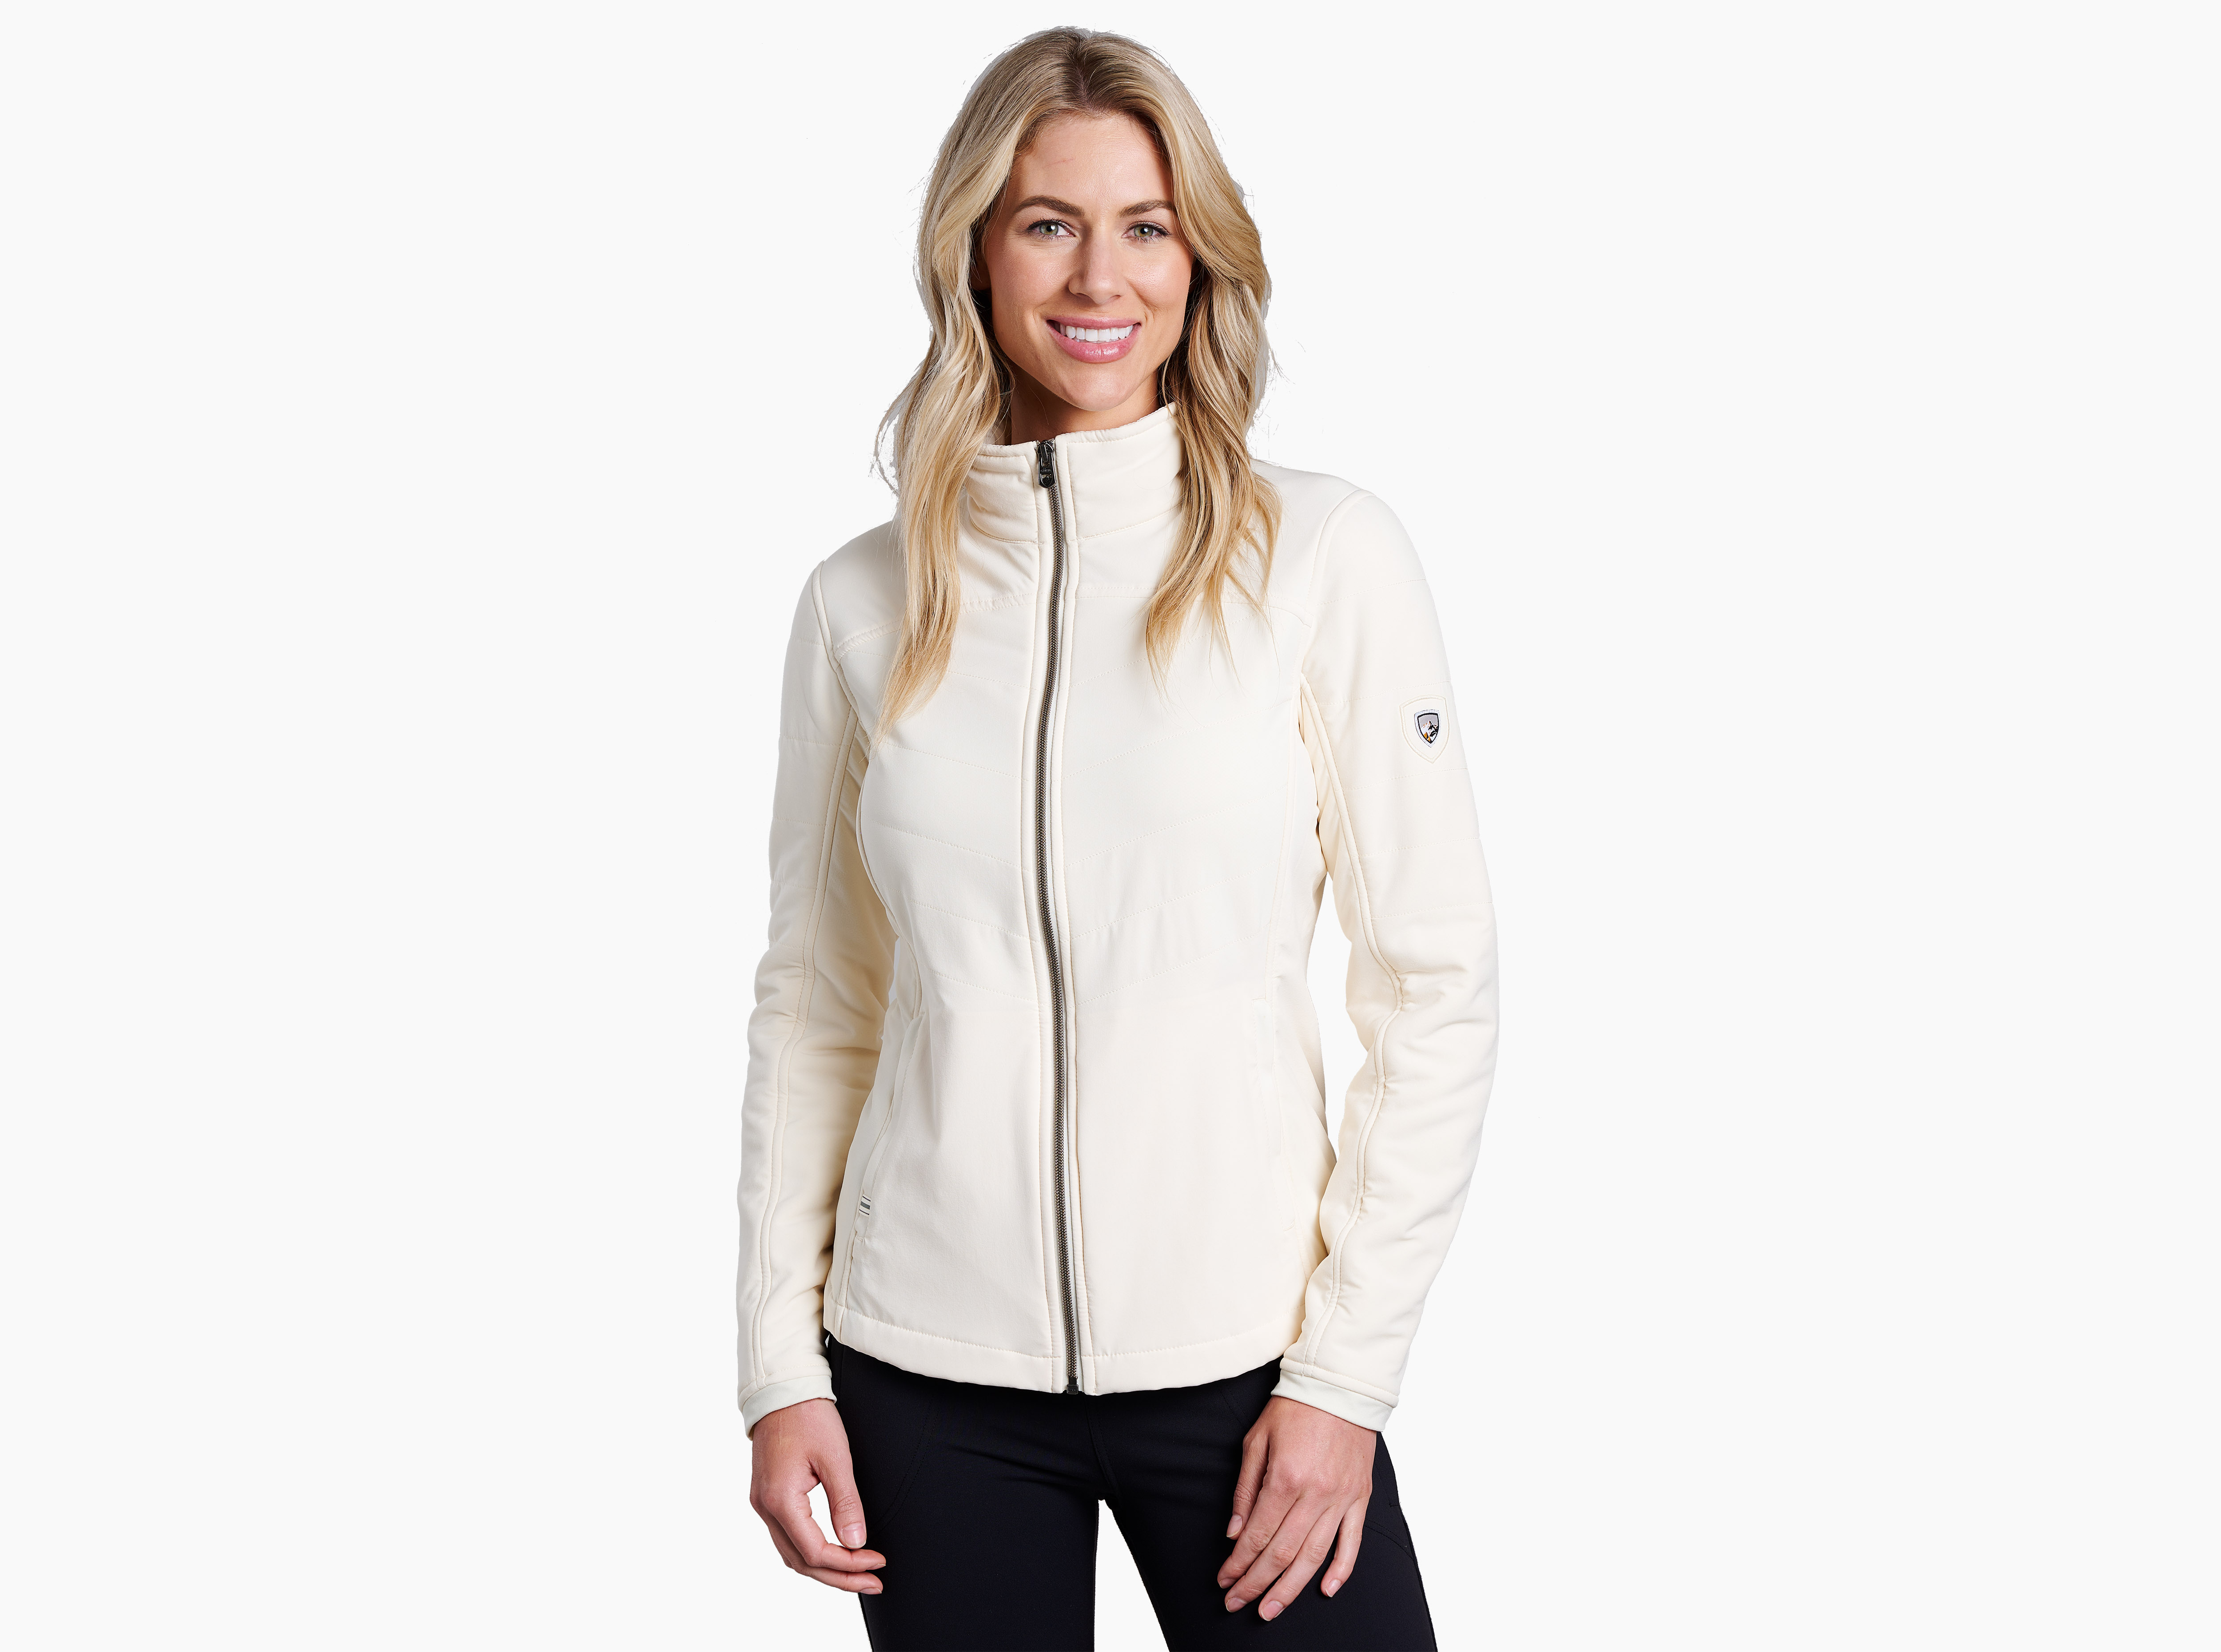 RuggedOutdoors - The KÜHl Fleece Lined Luna Jacket features wind and  water-resistant fabric and high-pile Italian fleece lining to give you a  flexible jacket you can throw on all year long! Get